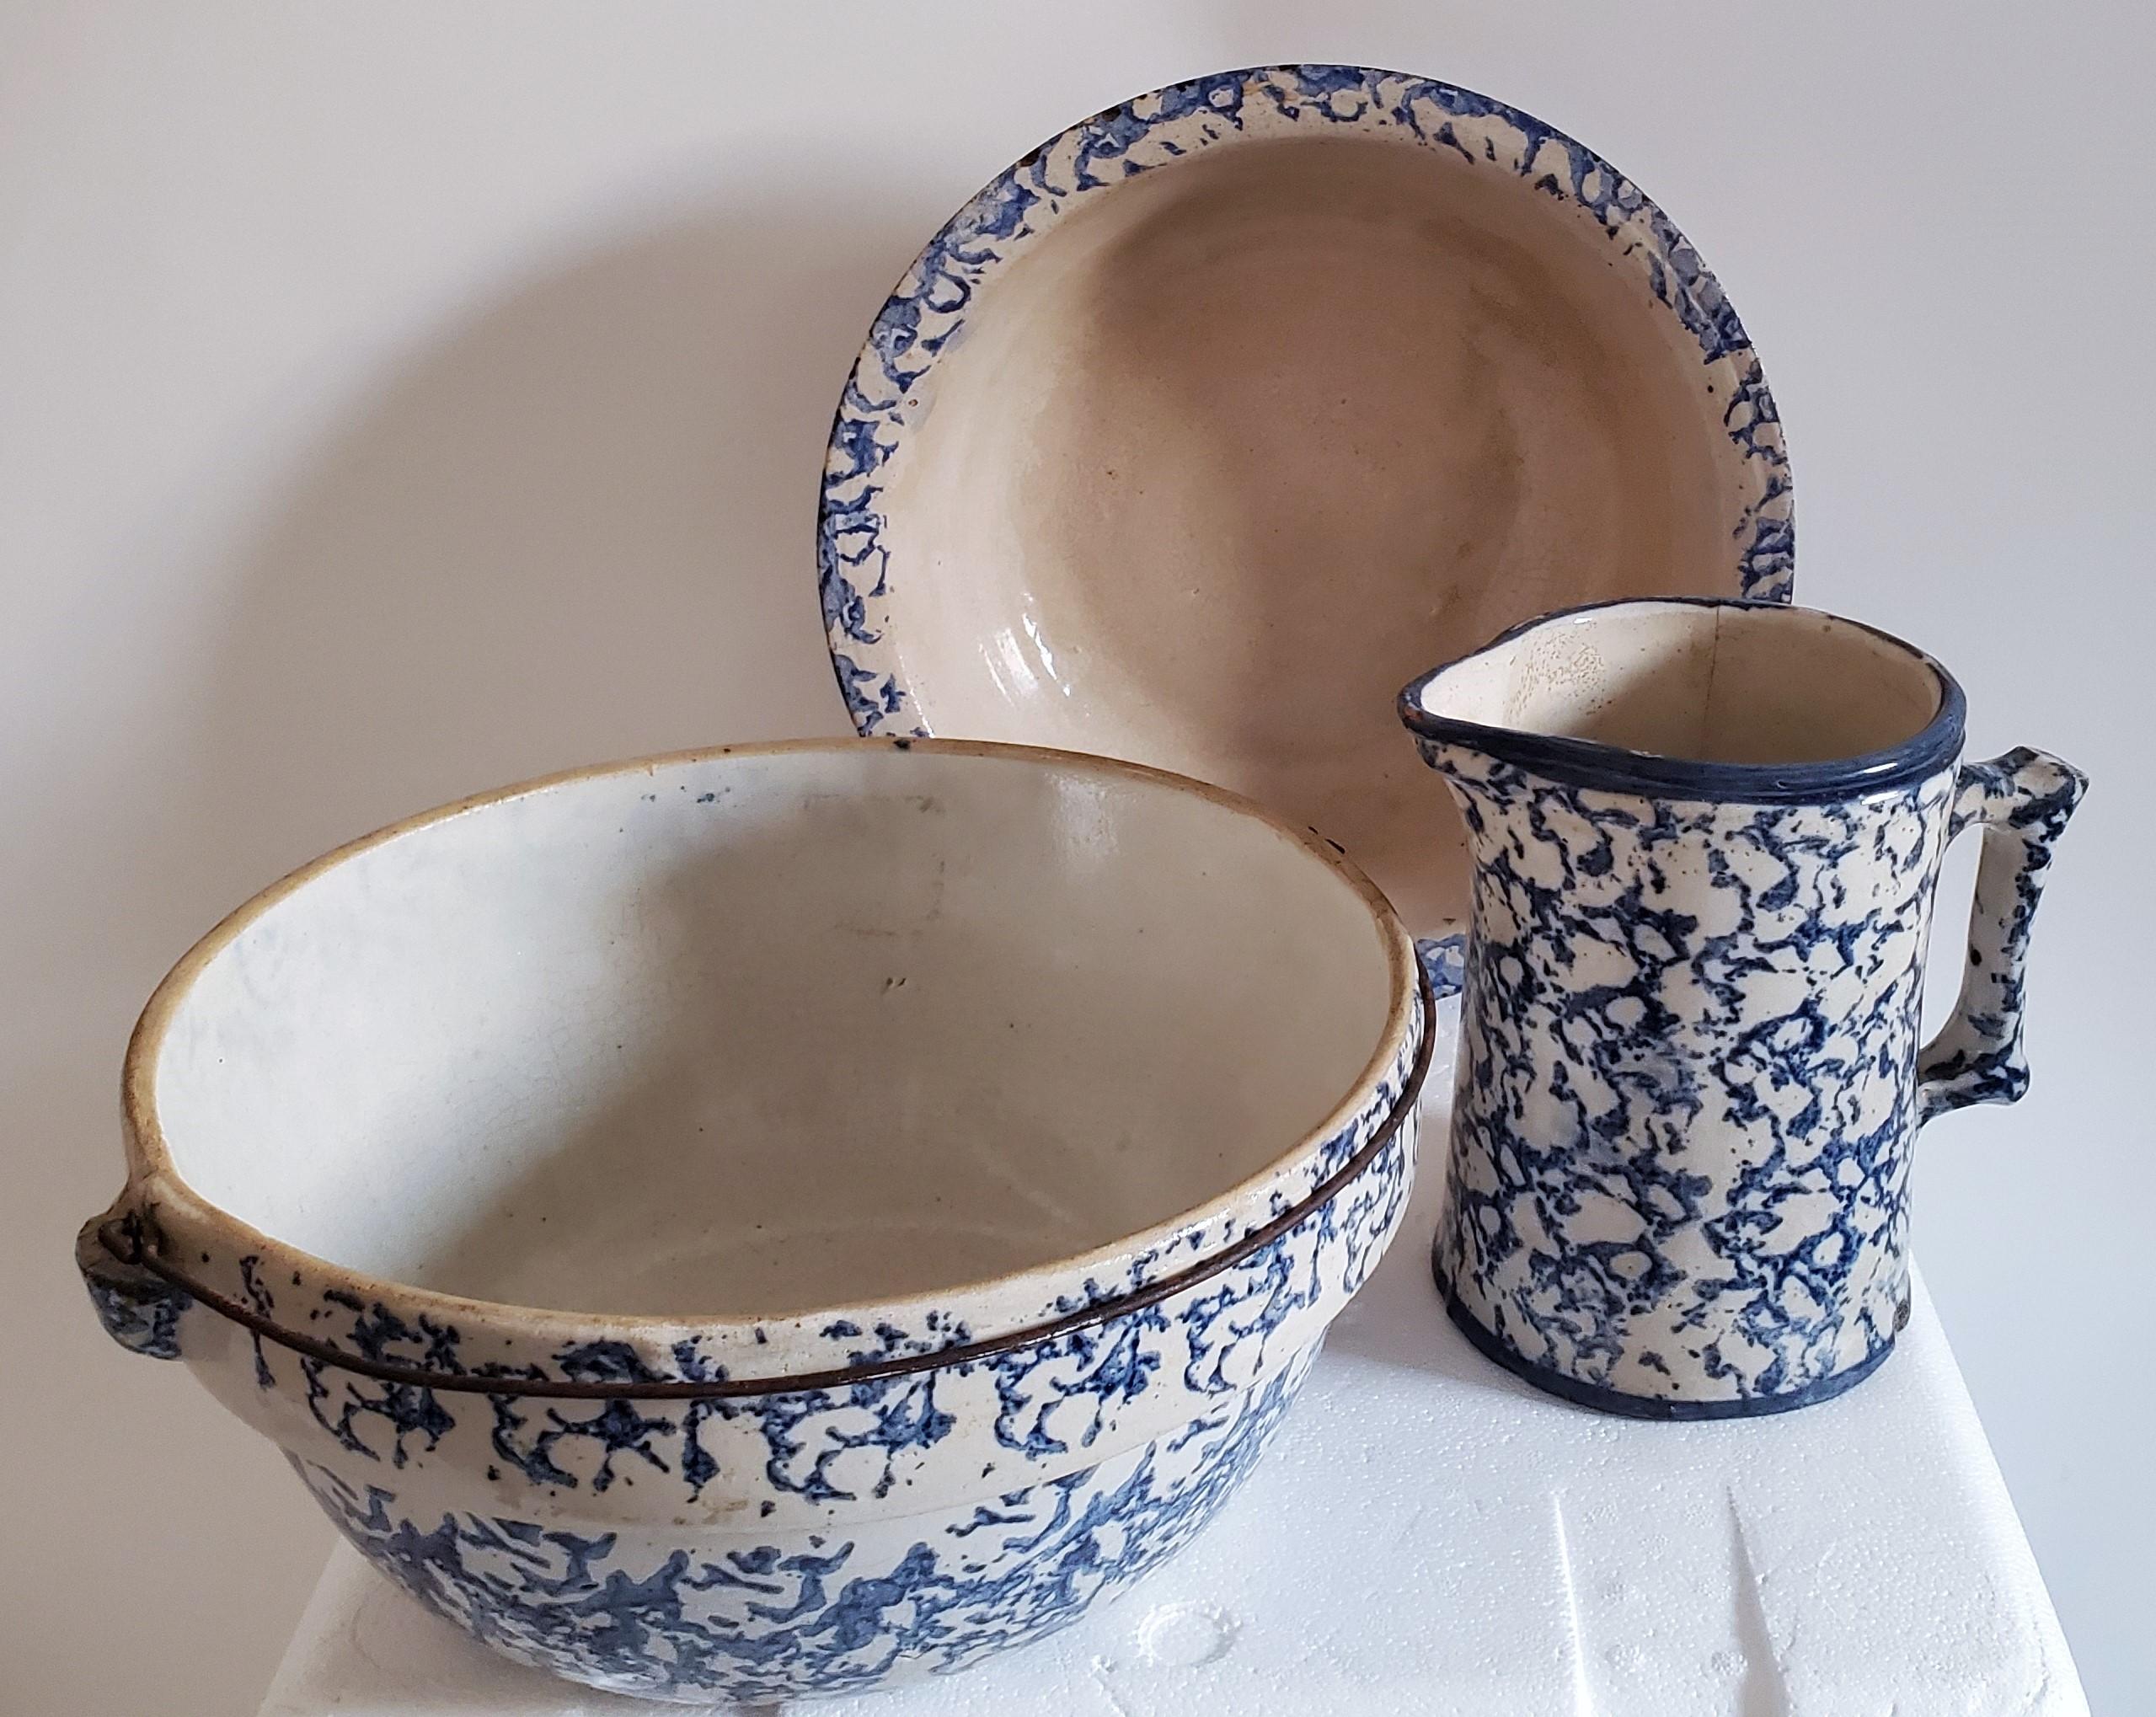 These three pieces are sponge ware with minor spider cracks but not that bad. Great shelf pieces. We just bought a huge collection of sponge ware and some pieces had minor cracks or chips in them.

Measures: large bowl with metal hanger 12 x